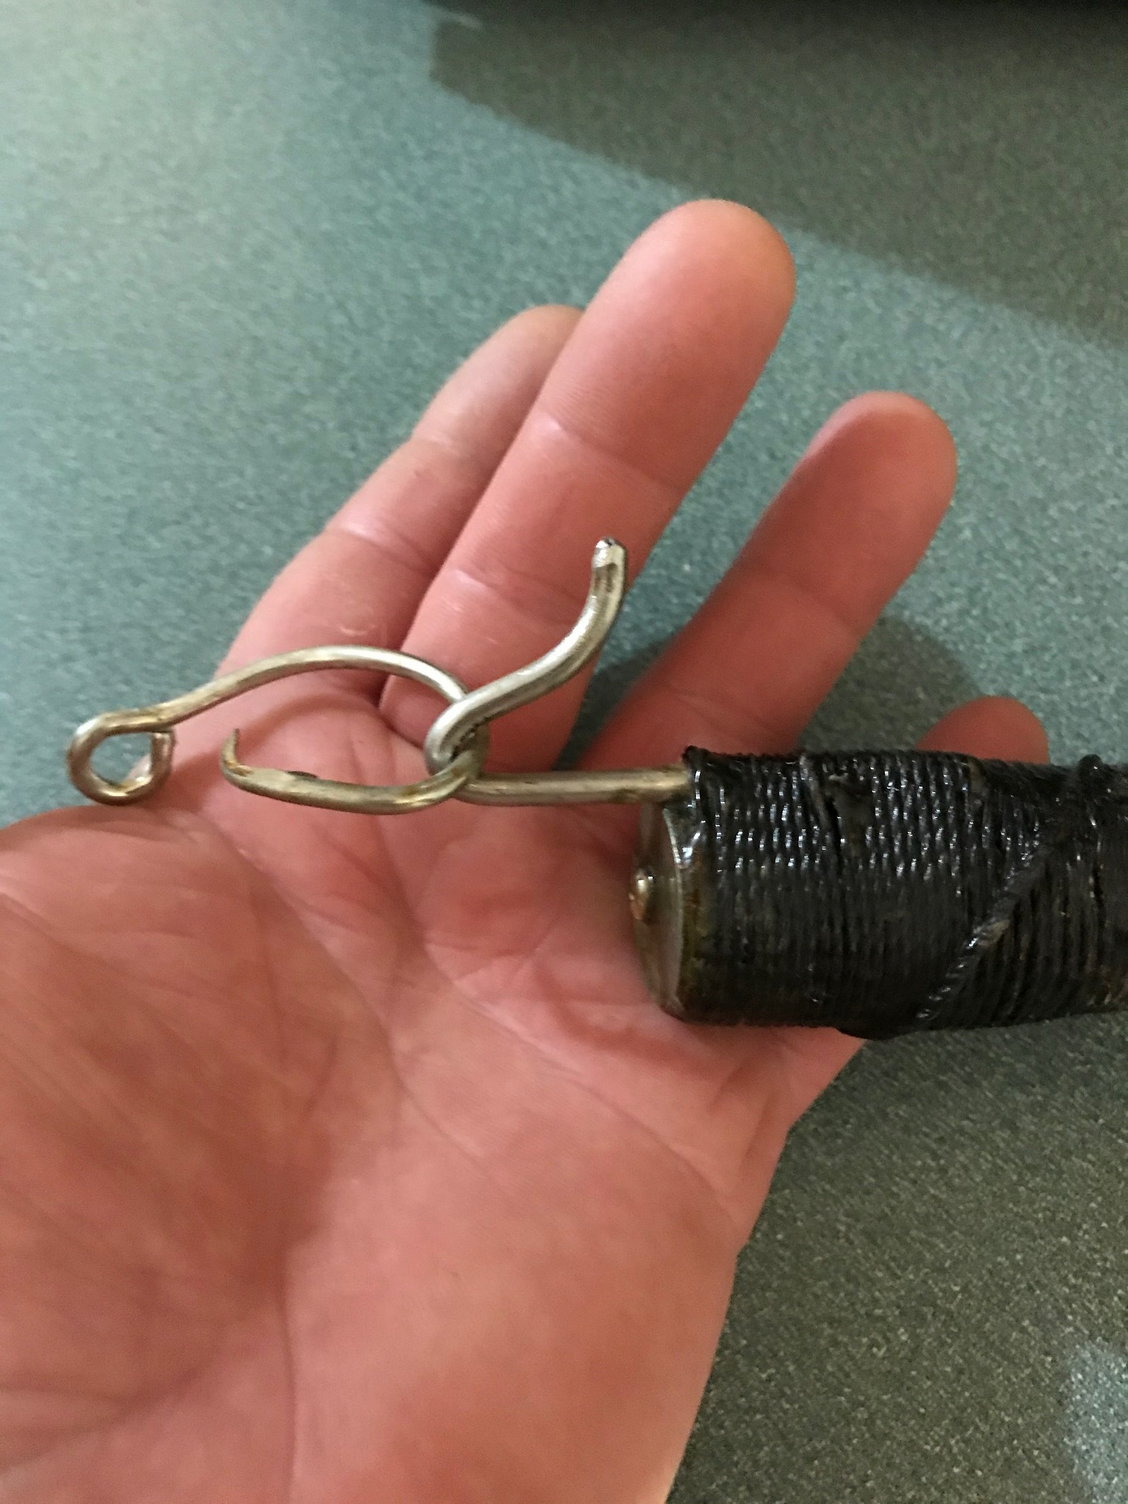 Best hook cutters? - The Hull Truth - Boating and Fishing Forum